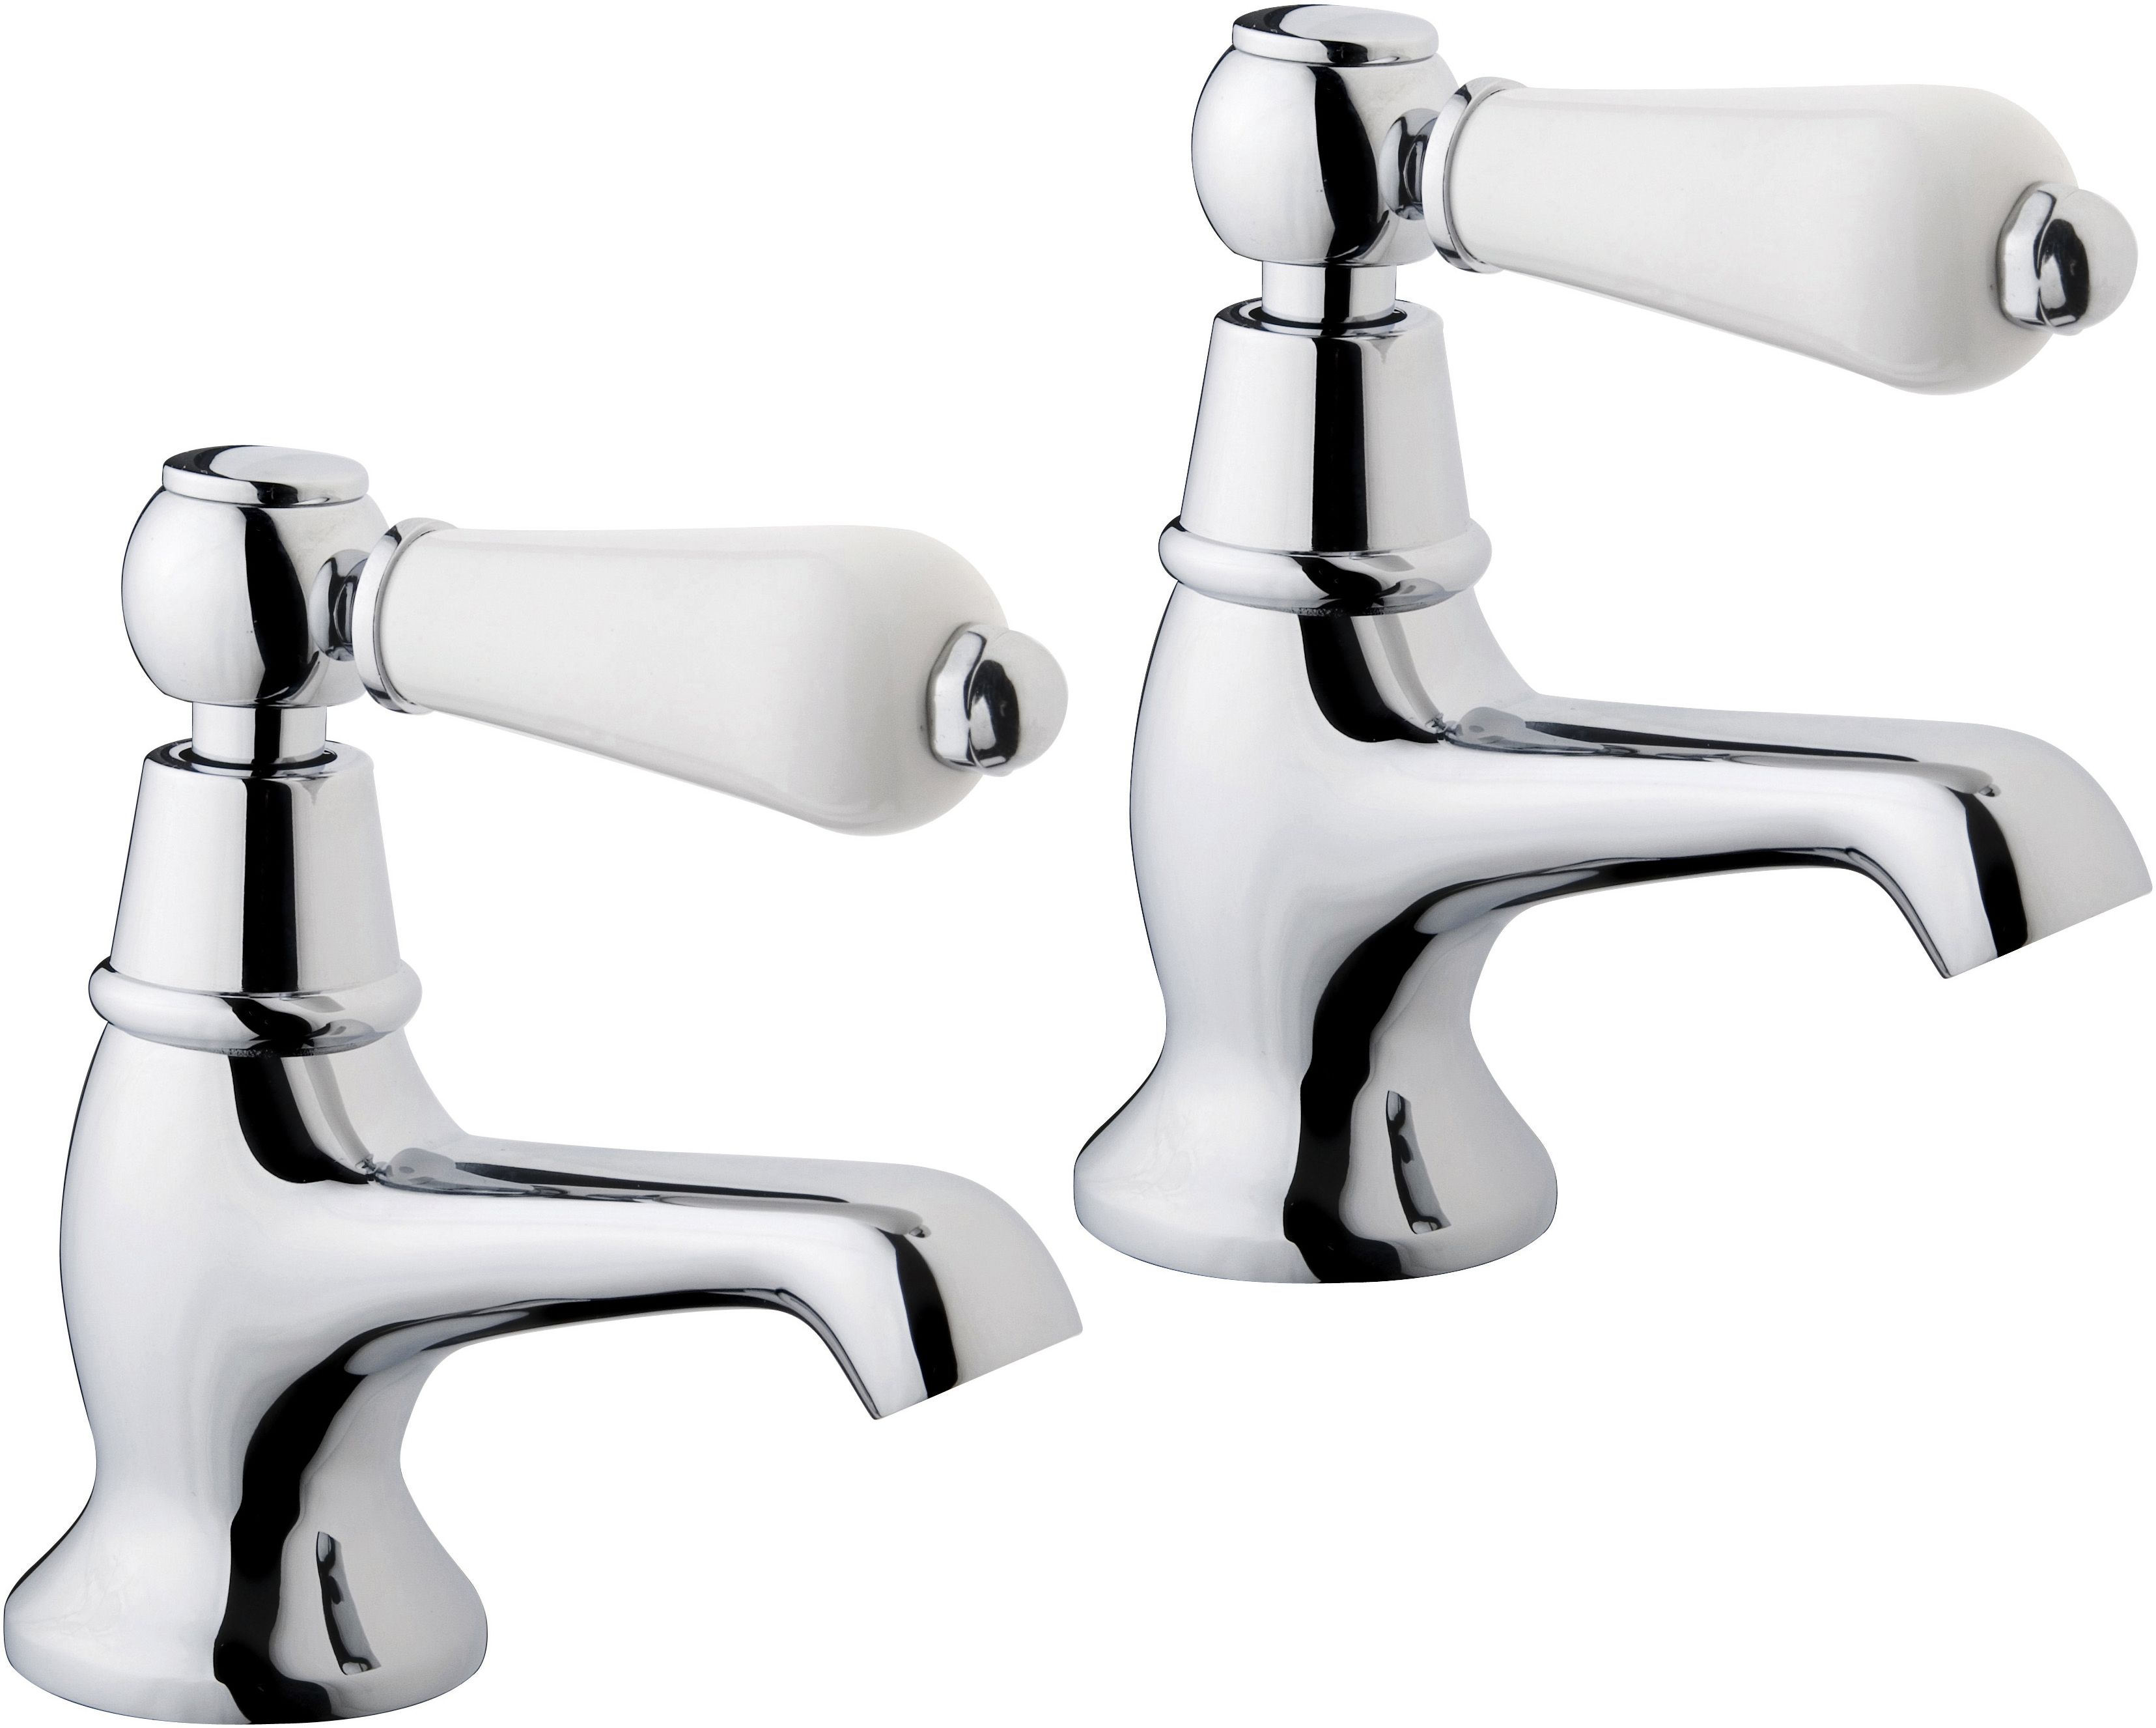 Image of Wickes Enchanted Basin Taps - Chrome